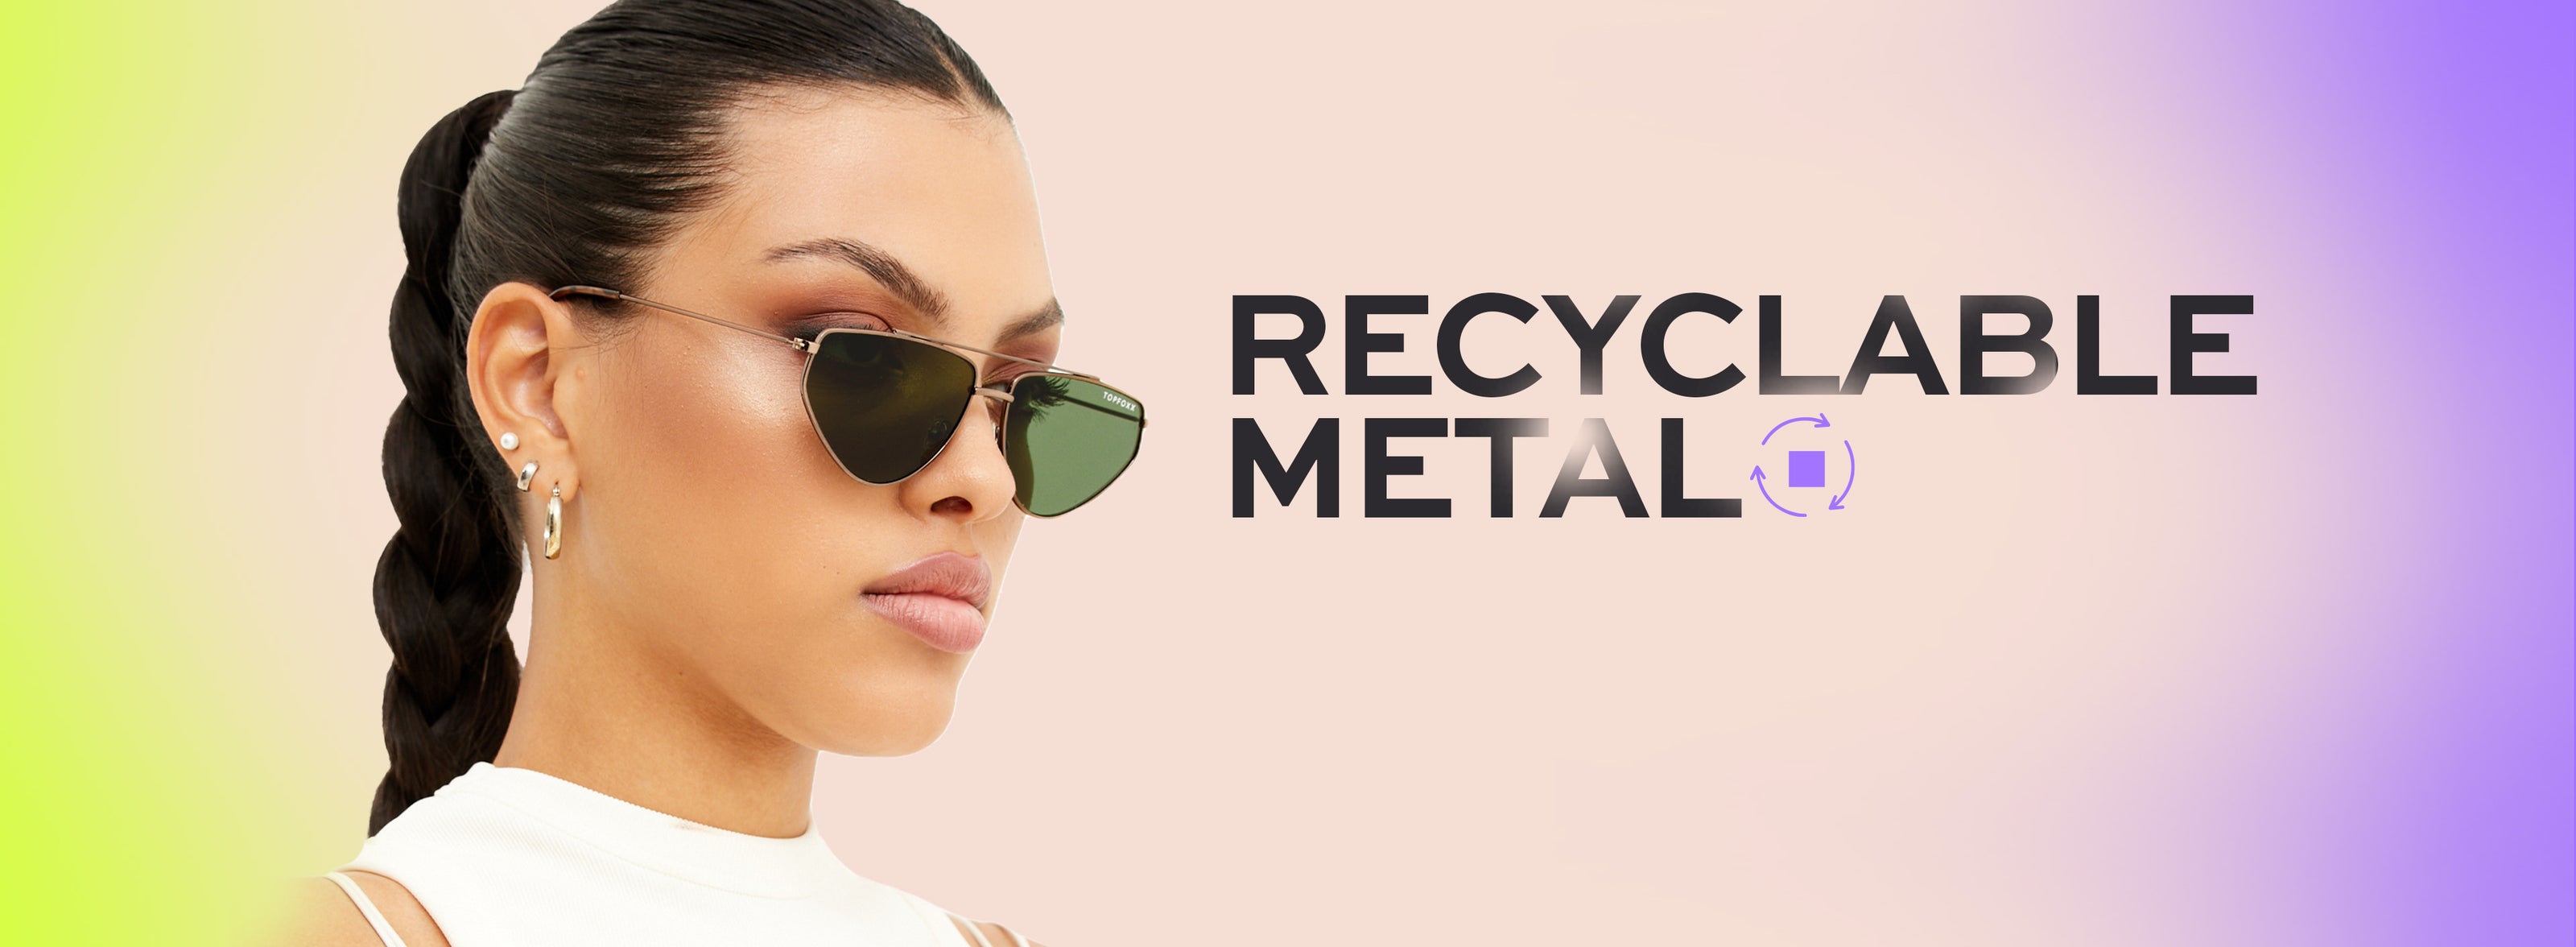 Recyclable Metal